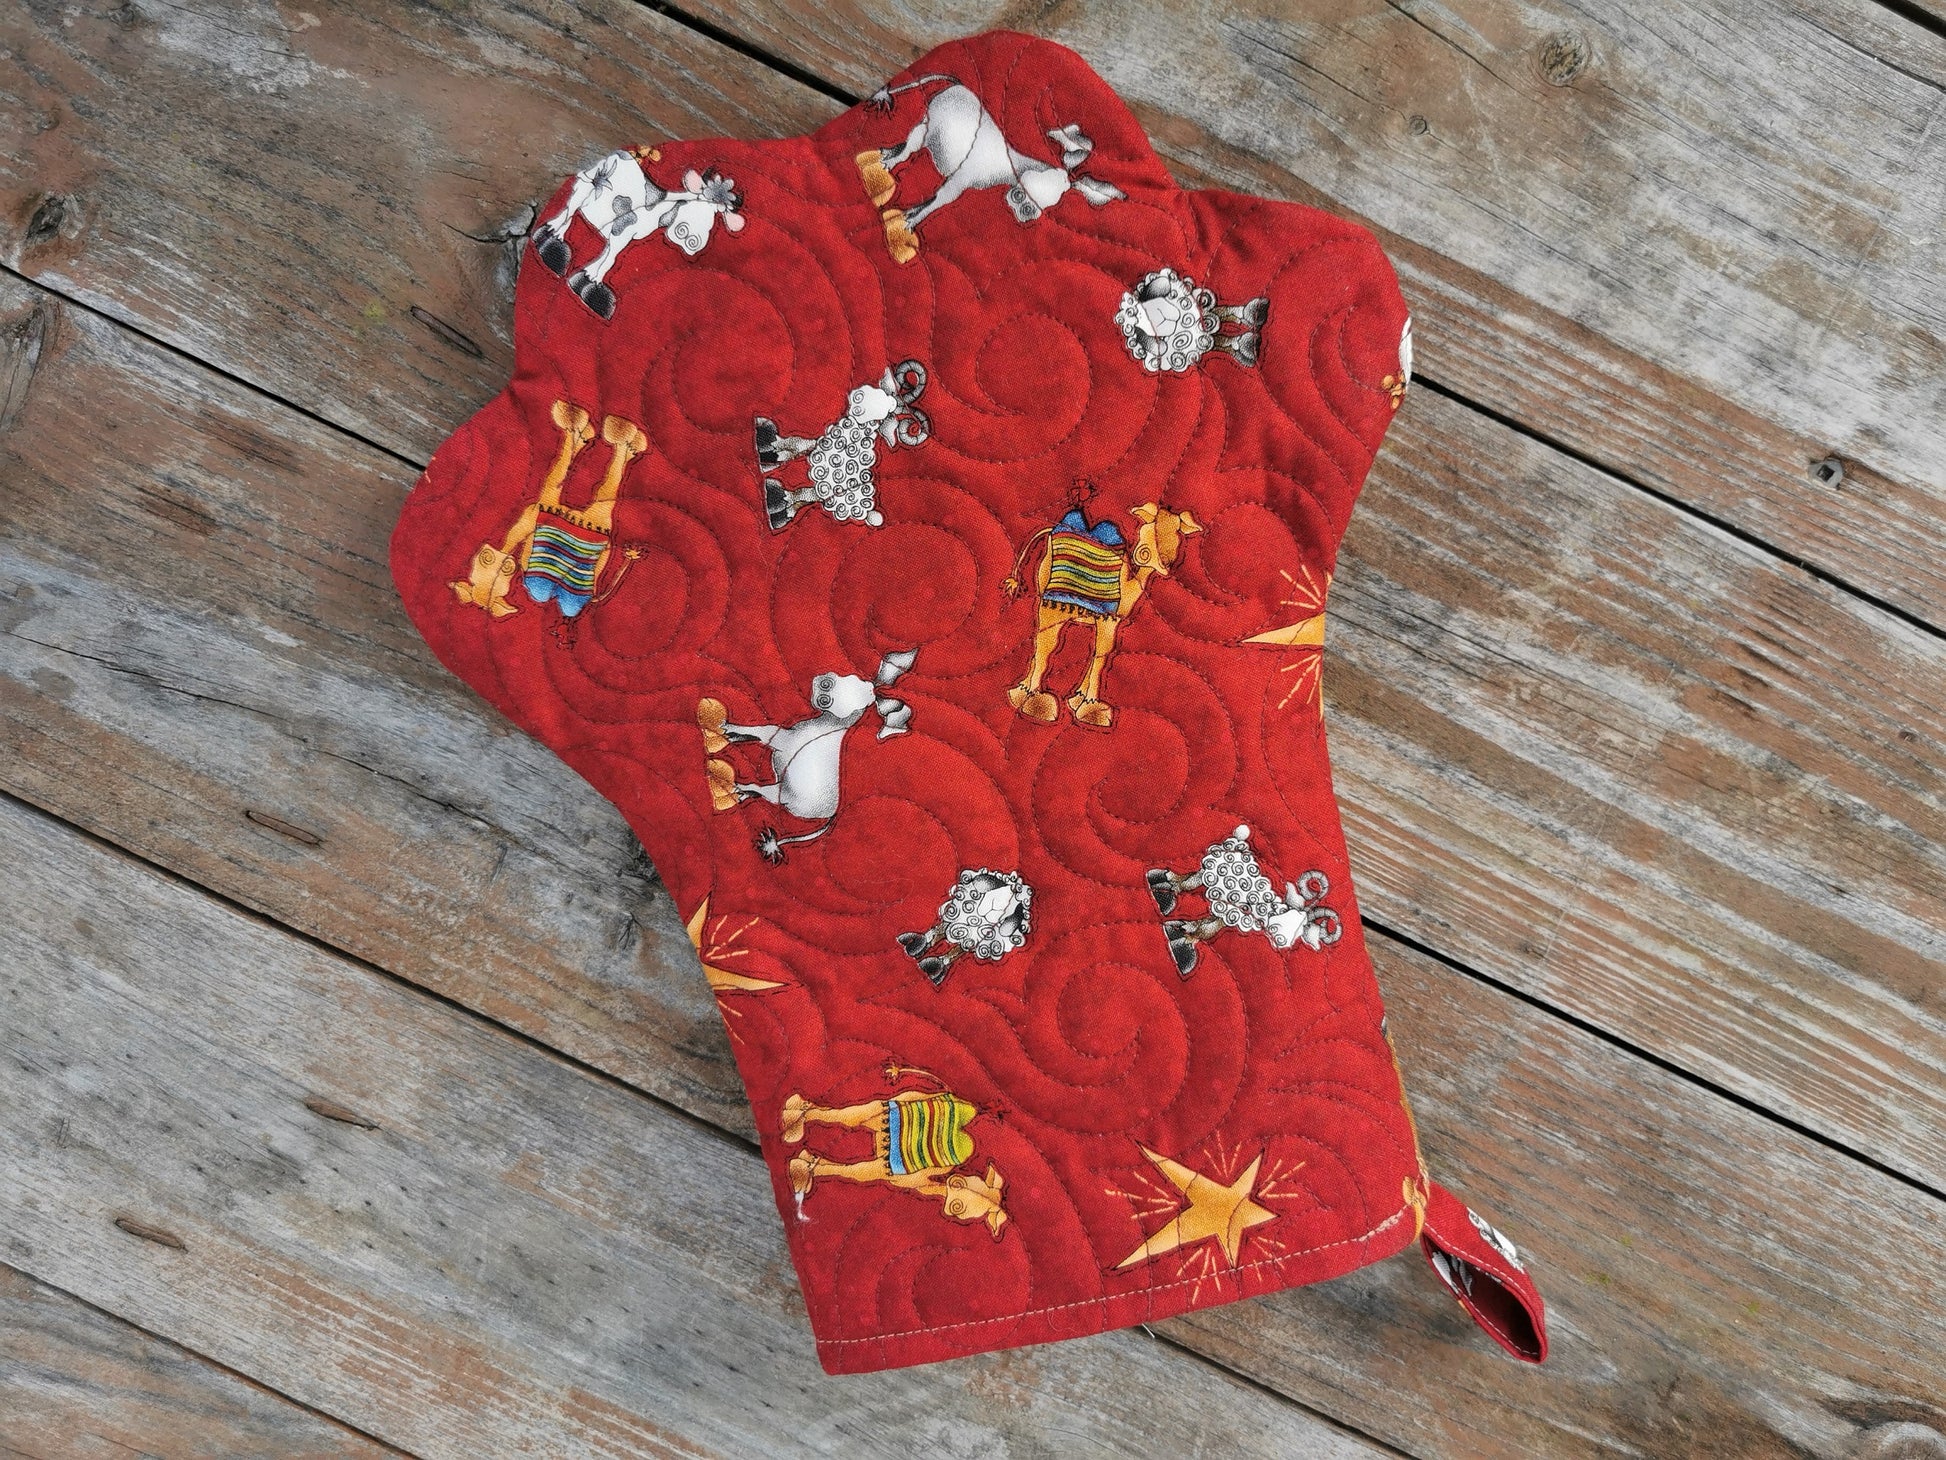 back of paw stocking with Christmas theme fabric